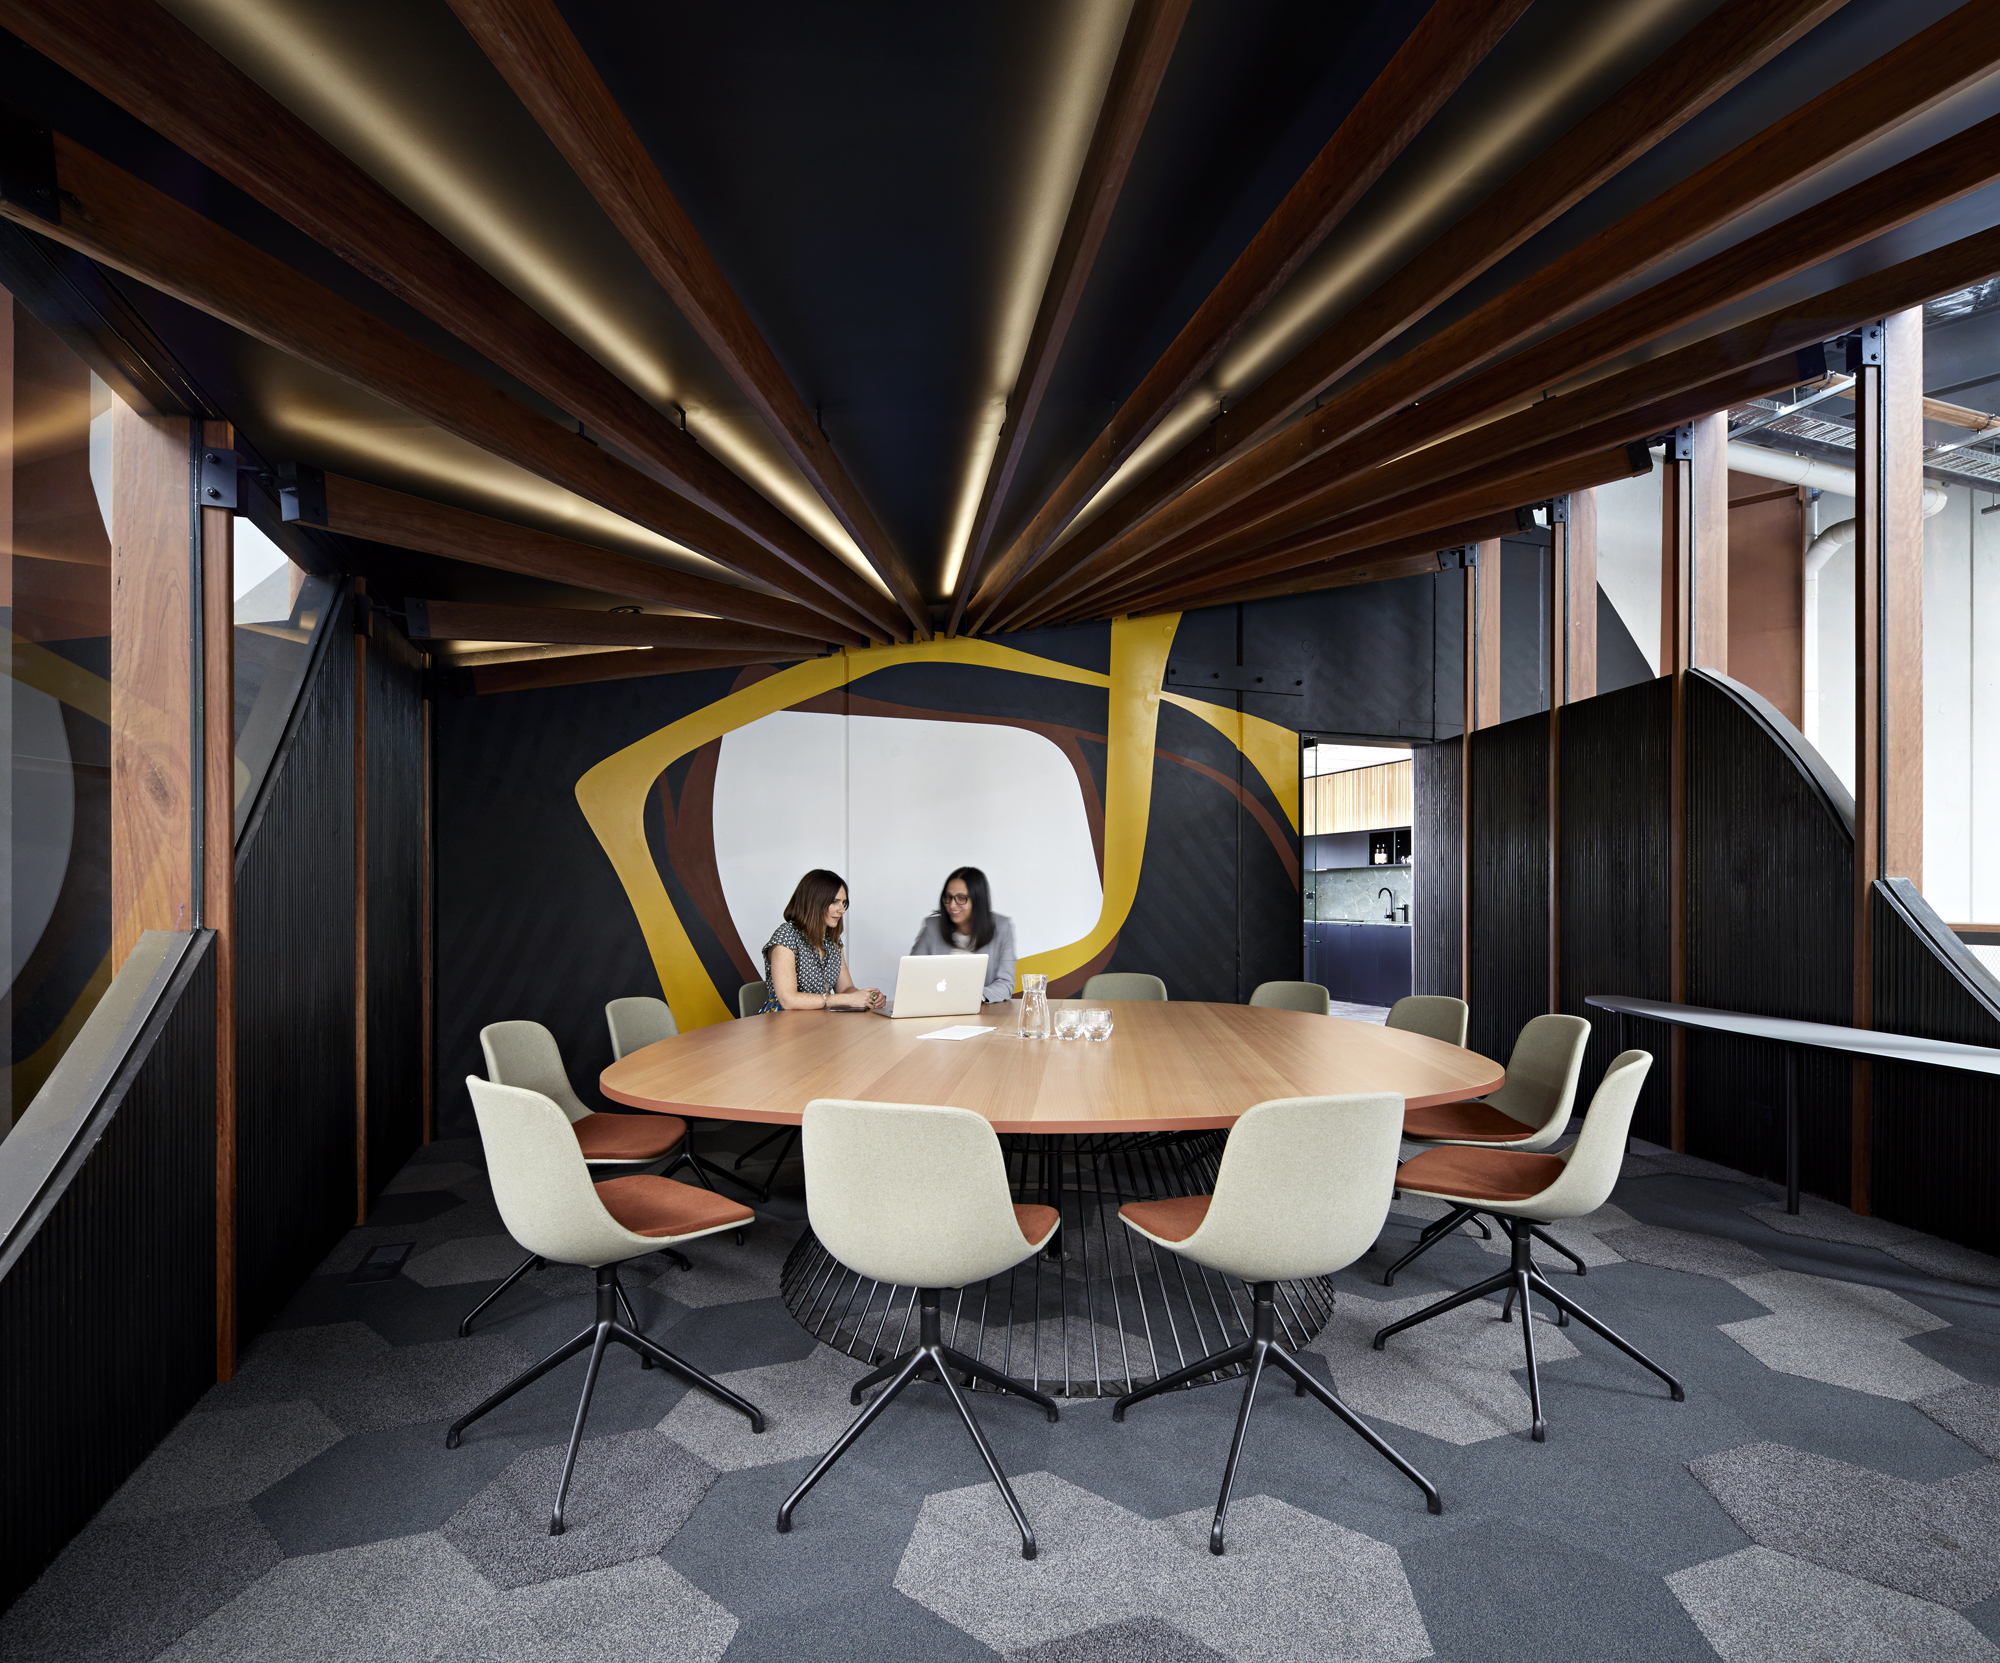 Meeting Room with a Dynamic and Energetic Impression